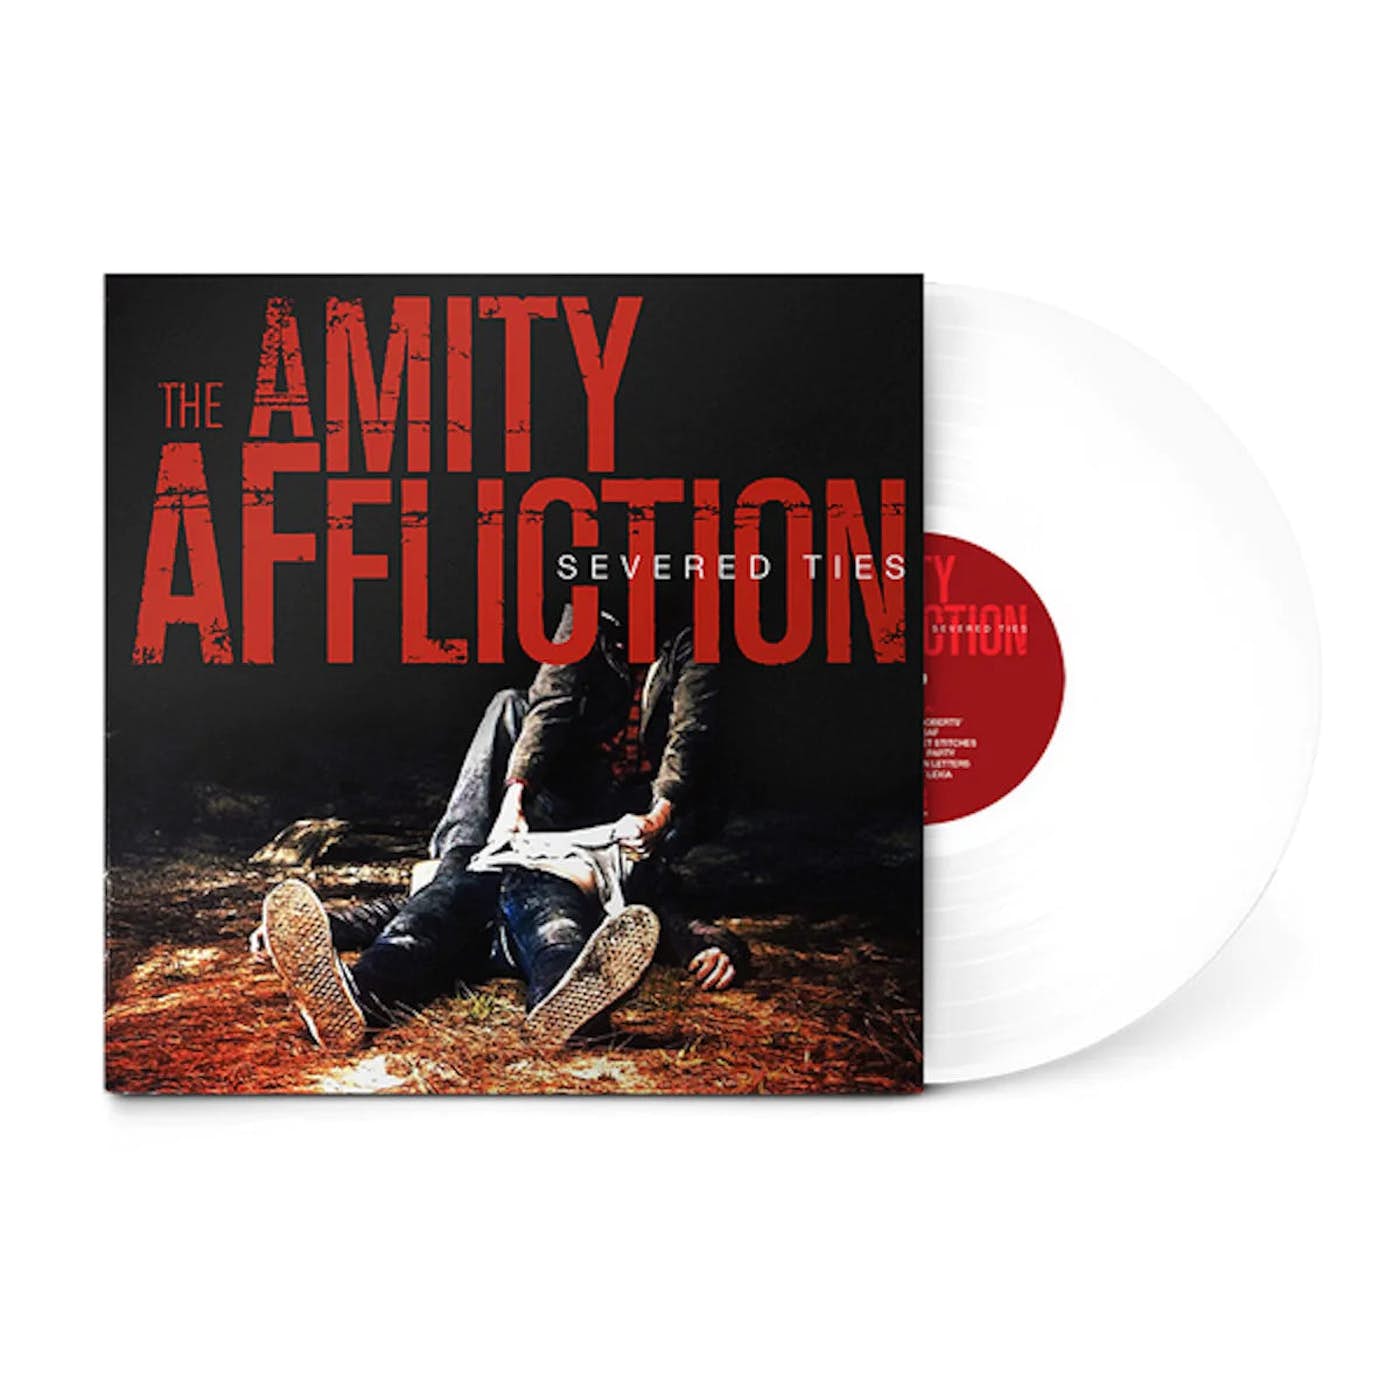 The Amity Affliction LP - Severed Ties (Vinyl)